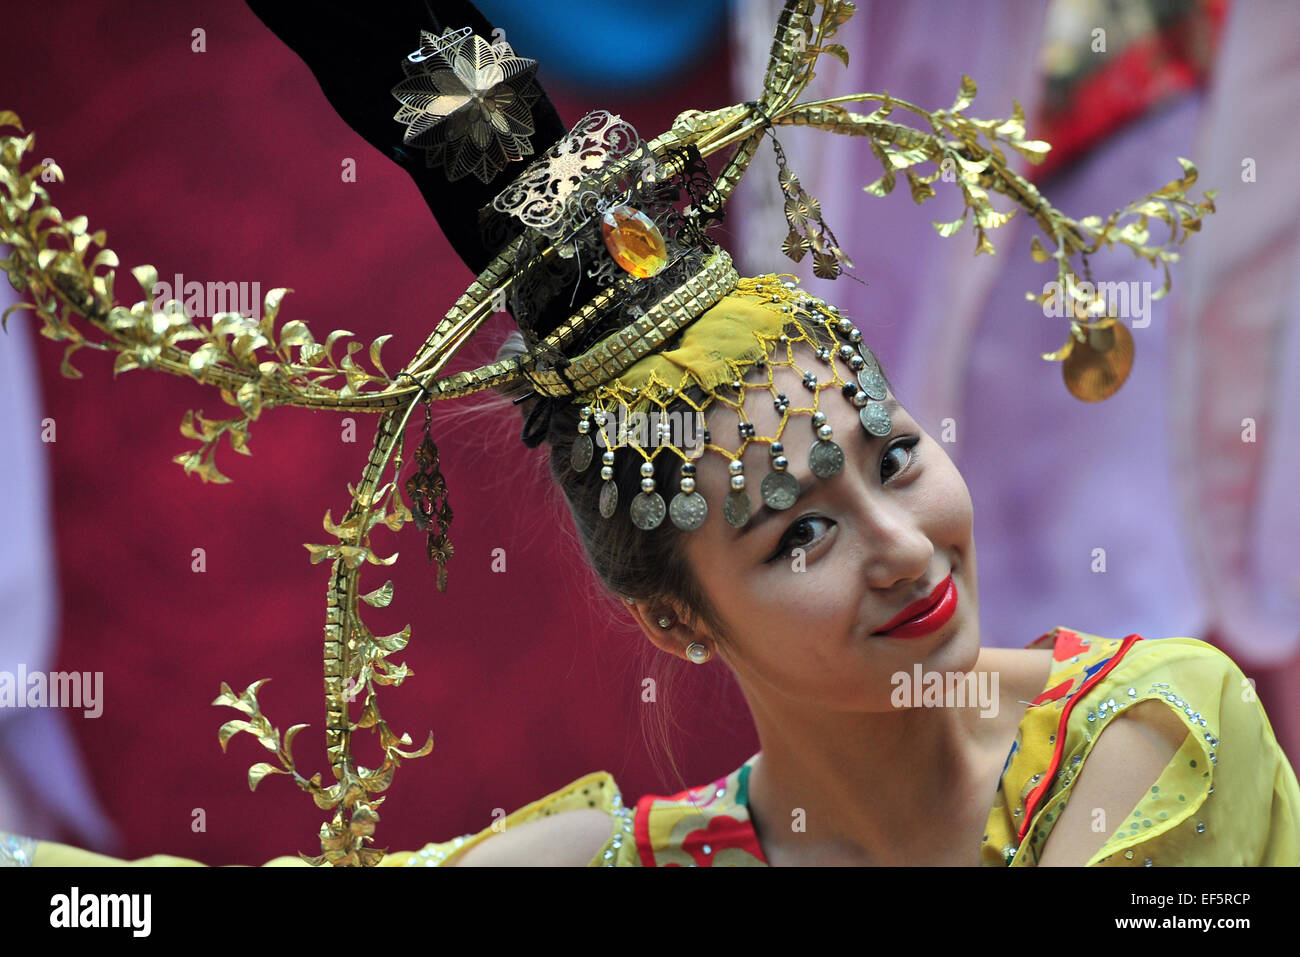 Singapore. 27th Jan, 2015. A performer dances on stage in Singapore's Suntec City on Jan. 27, 2015. The 22nd edition of 'Spring In The City' opens on Tuesday in Singapore's Suntec City as part of the Lunar New Year celebrations. © Then Chih Wey/Xinhua/Alamy Live News Stock Photo